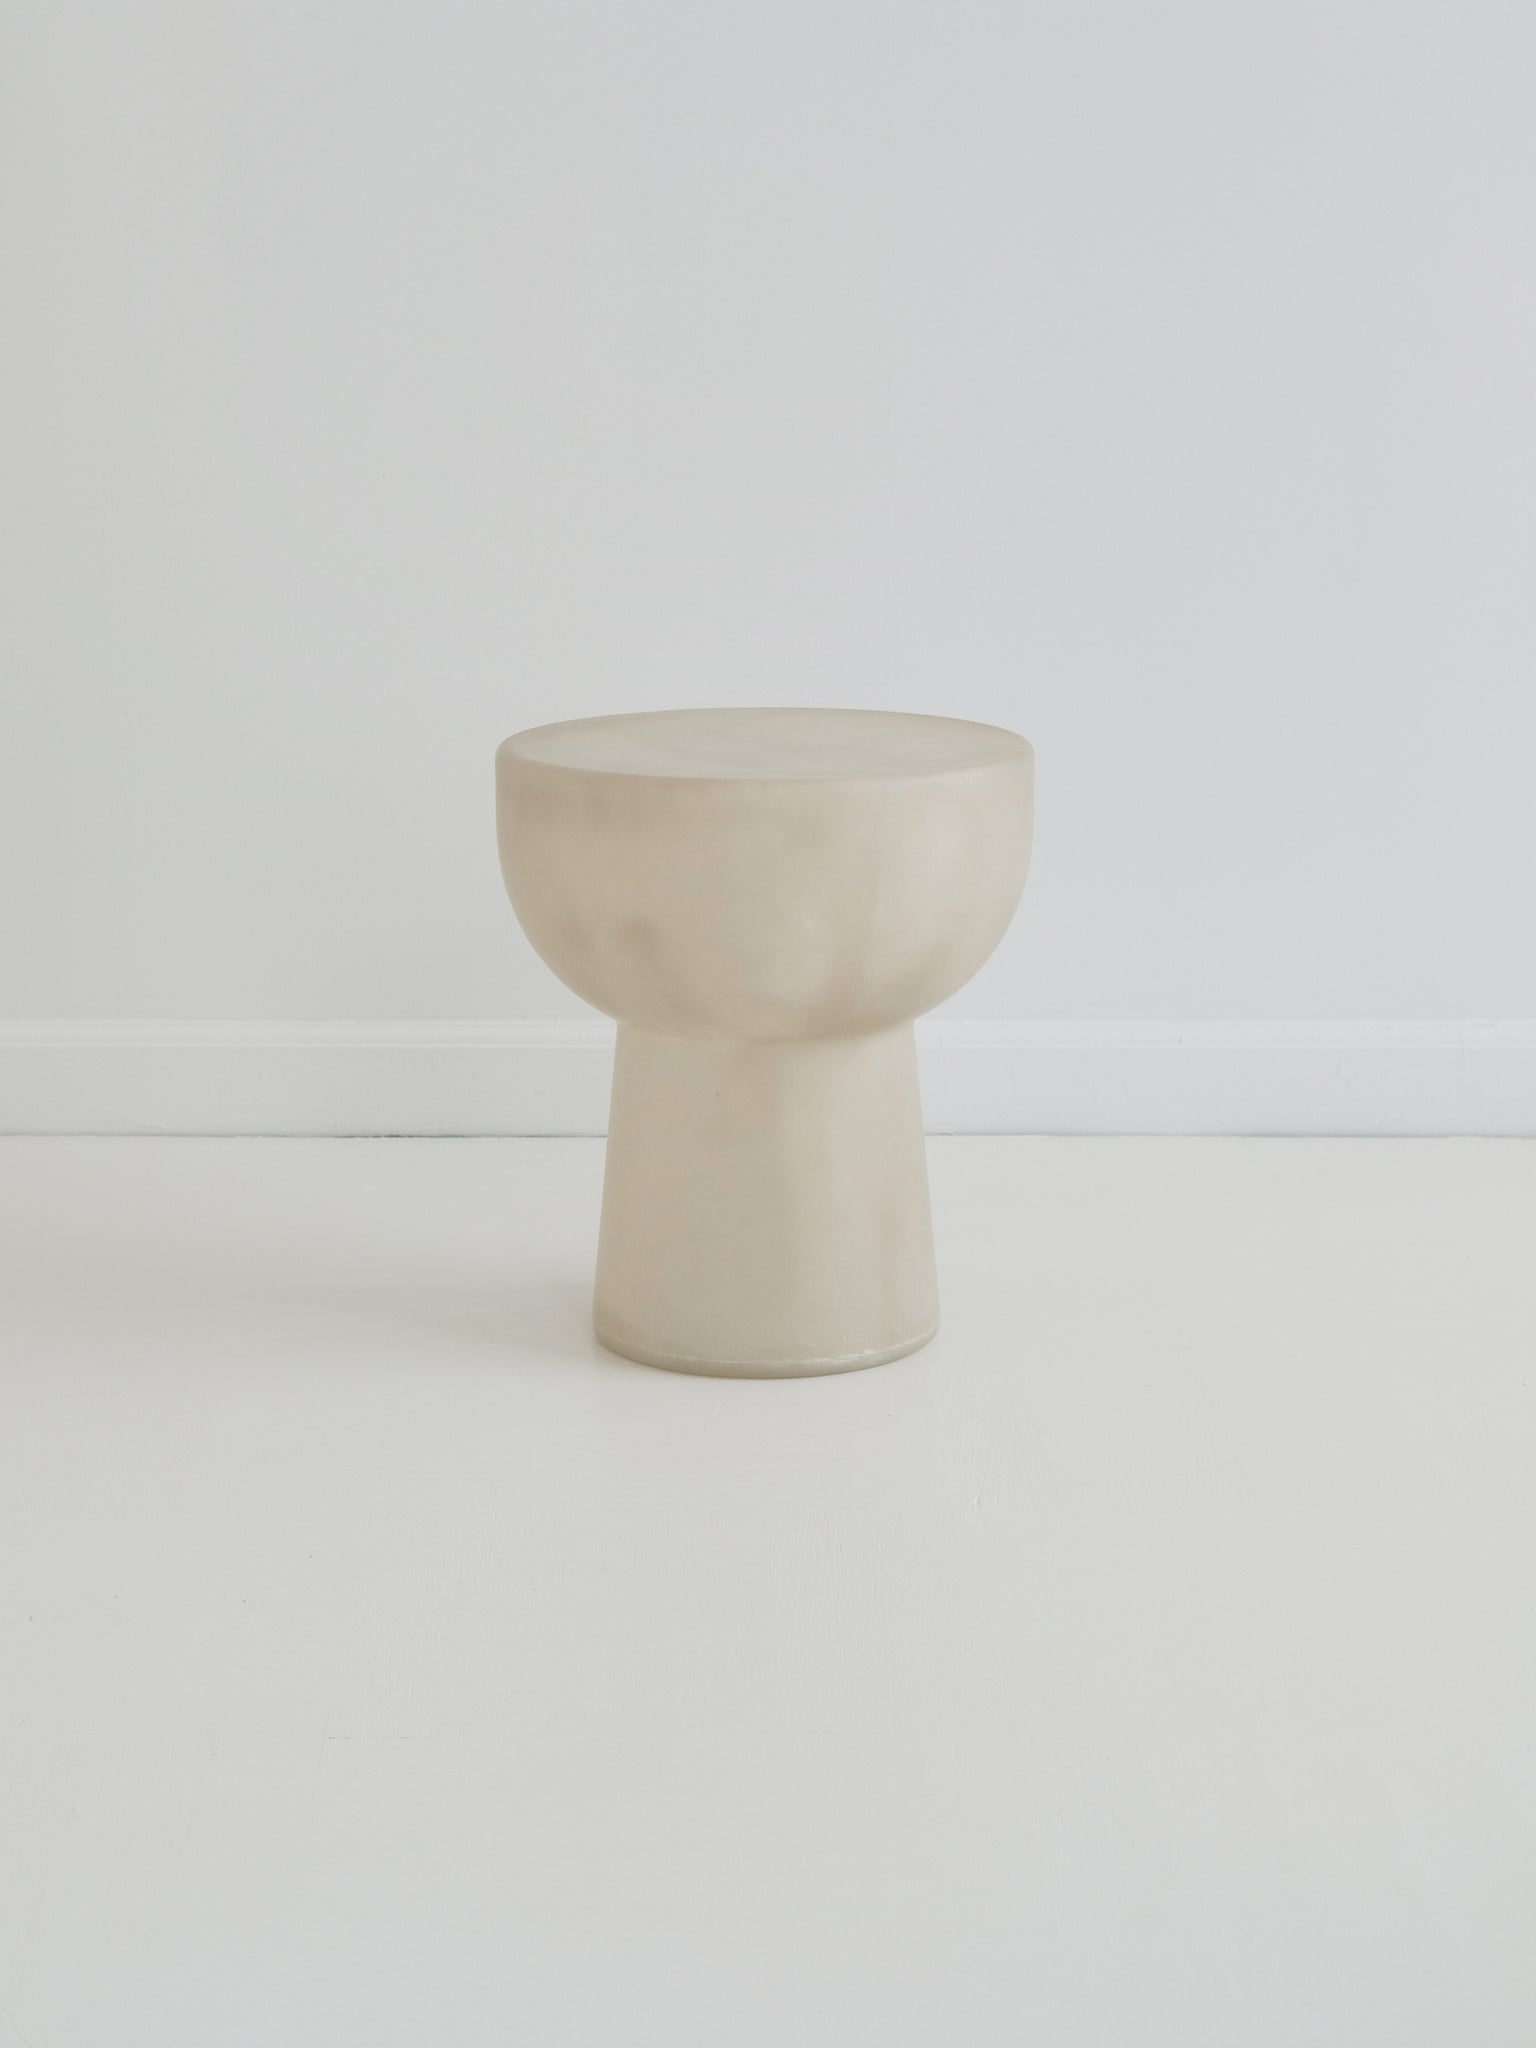 FAYE TOOGOOD ROLY POLY TABLE - RUE VERTE